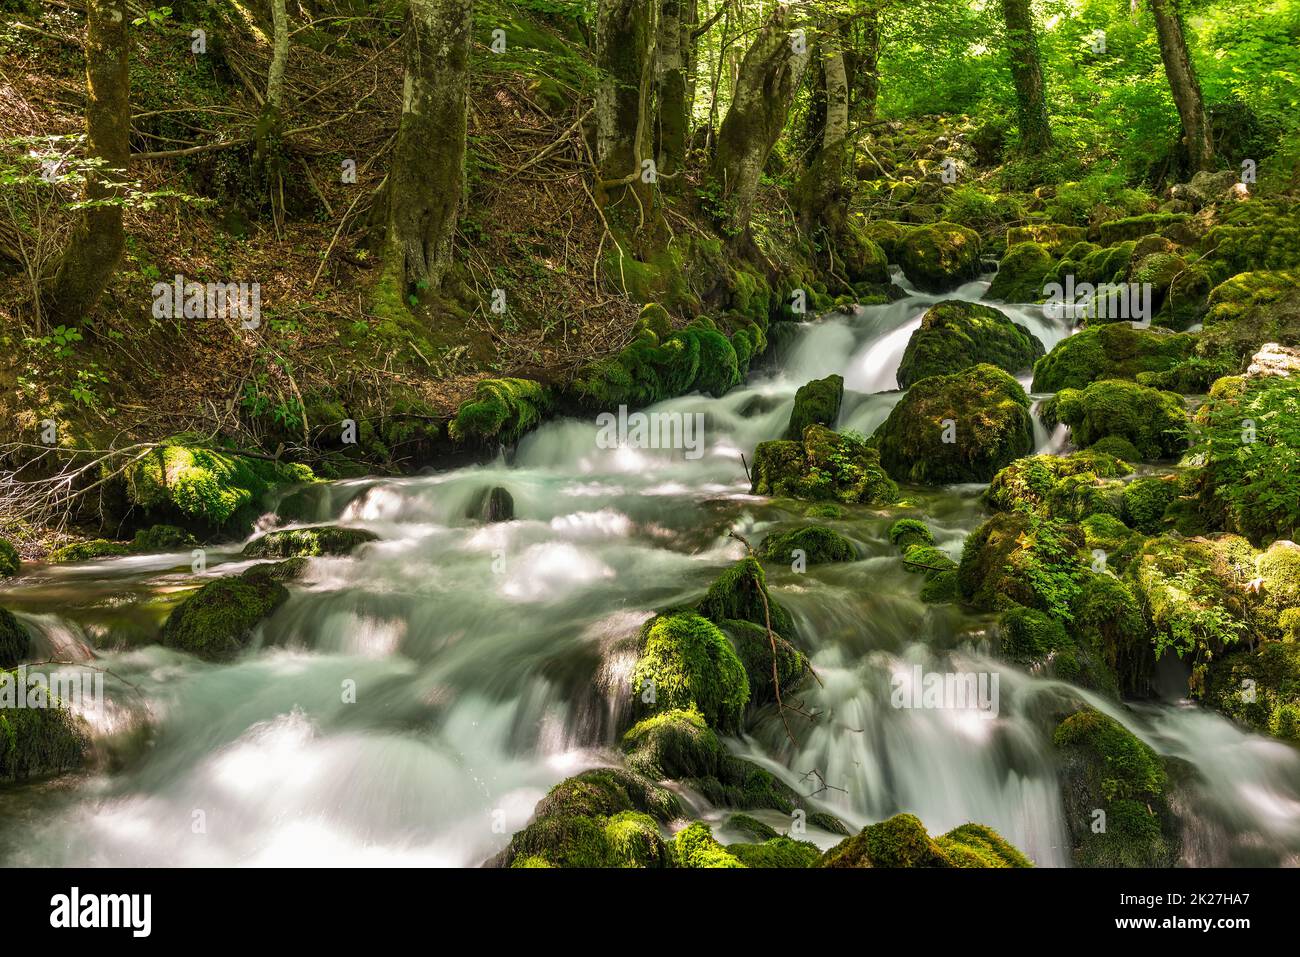 Flowing forest river Stock Photo